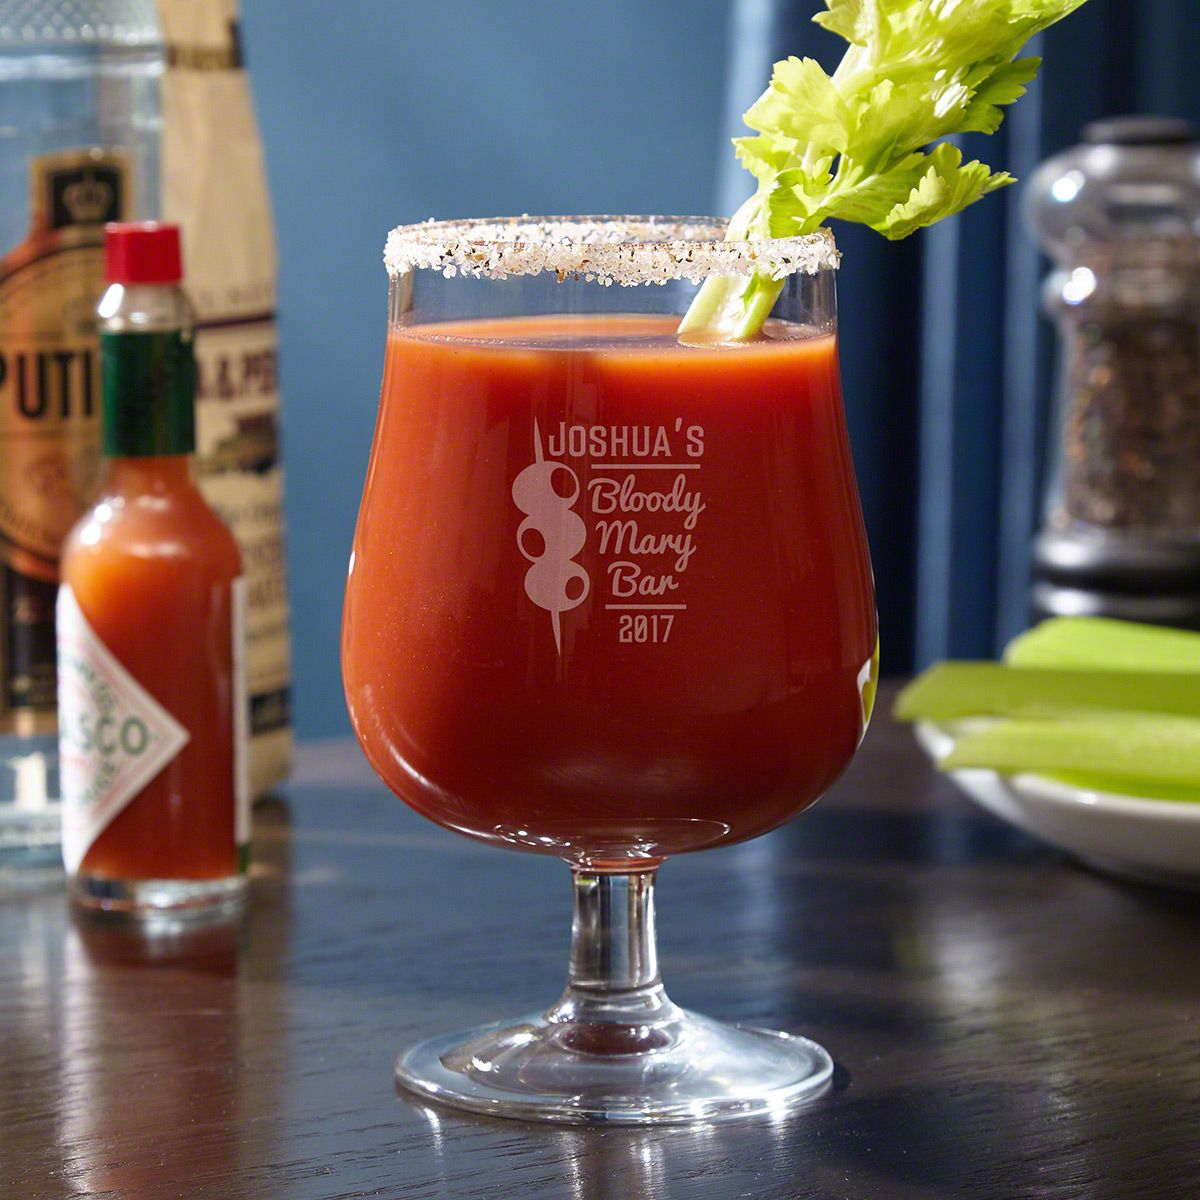 https://images.homewetbar.com/media/catalog/product/w/1/w105631-hurricane-bloody-mary-glass-update.jpg?store=default&image-type=image